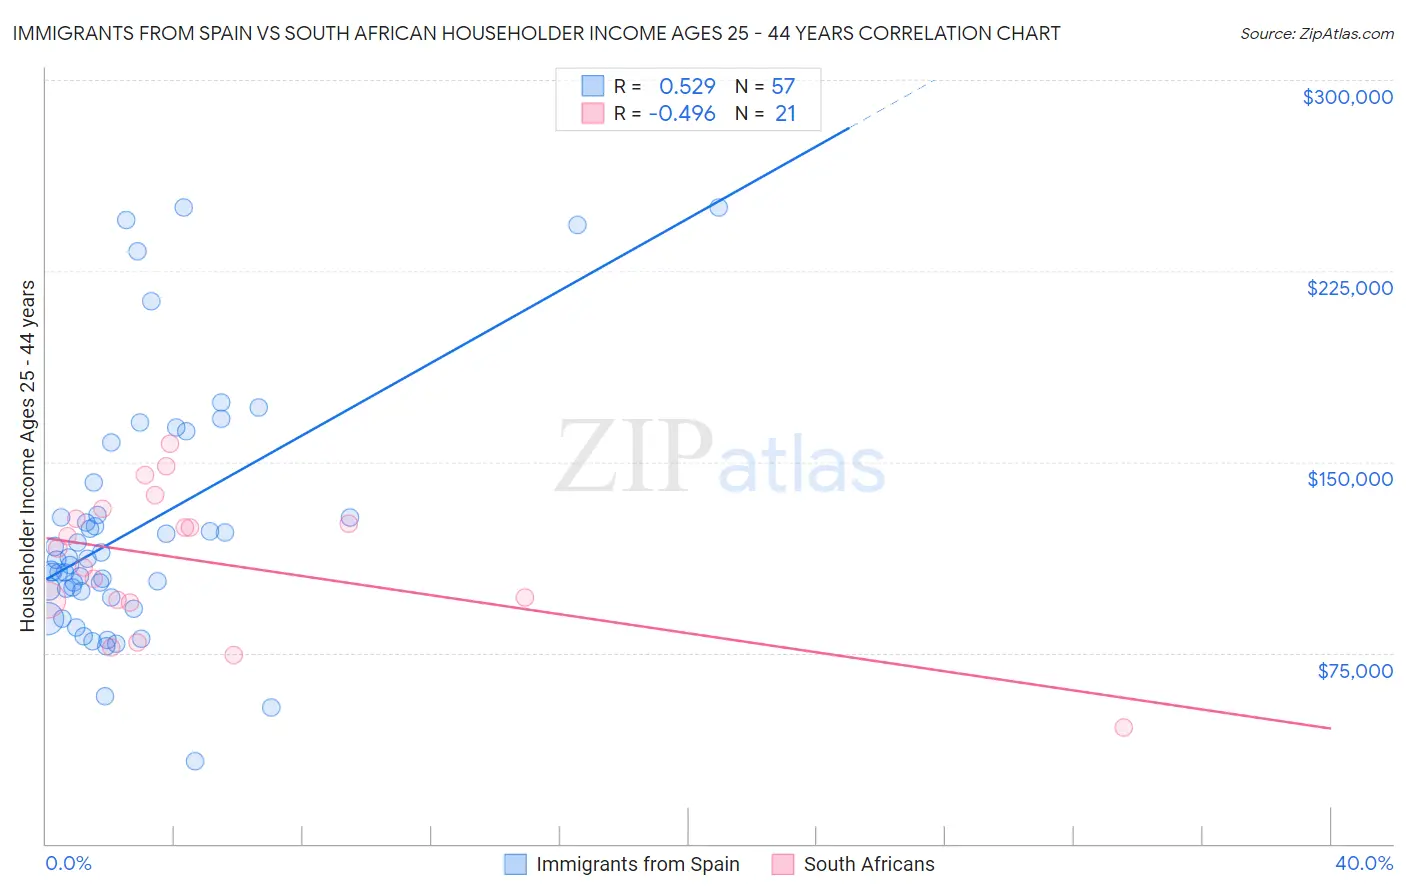 Immigrants from Spain vs South African Householder Income Ages 25 - 44 years